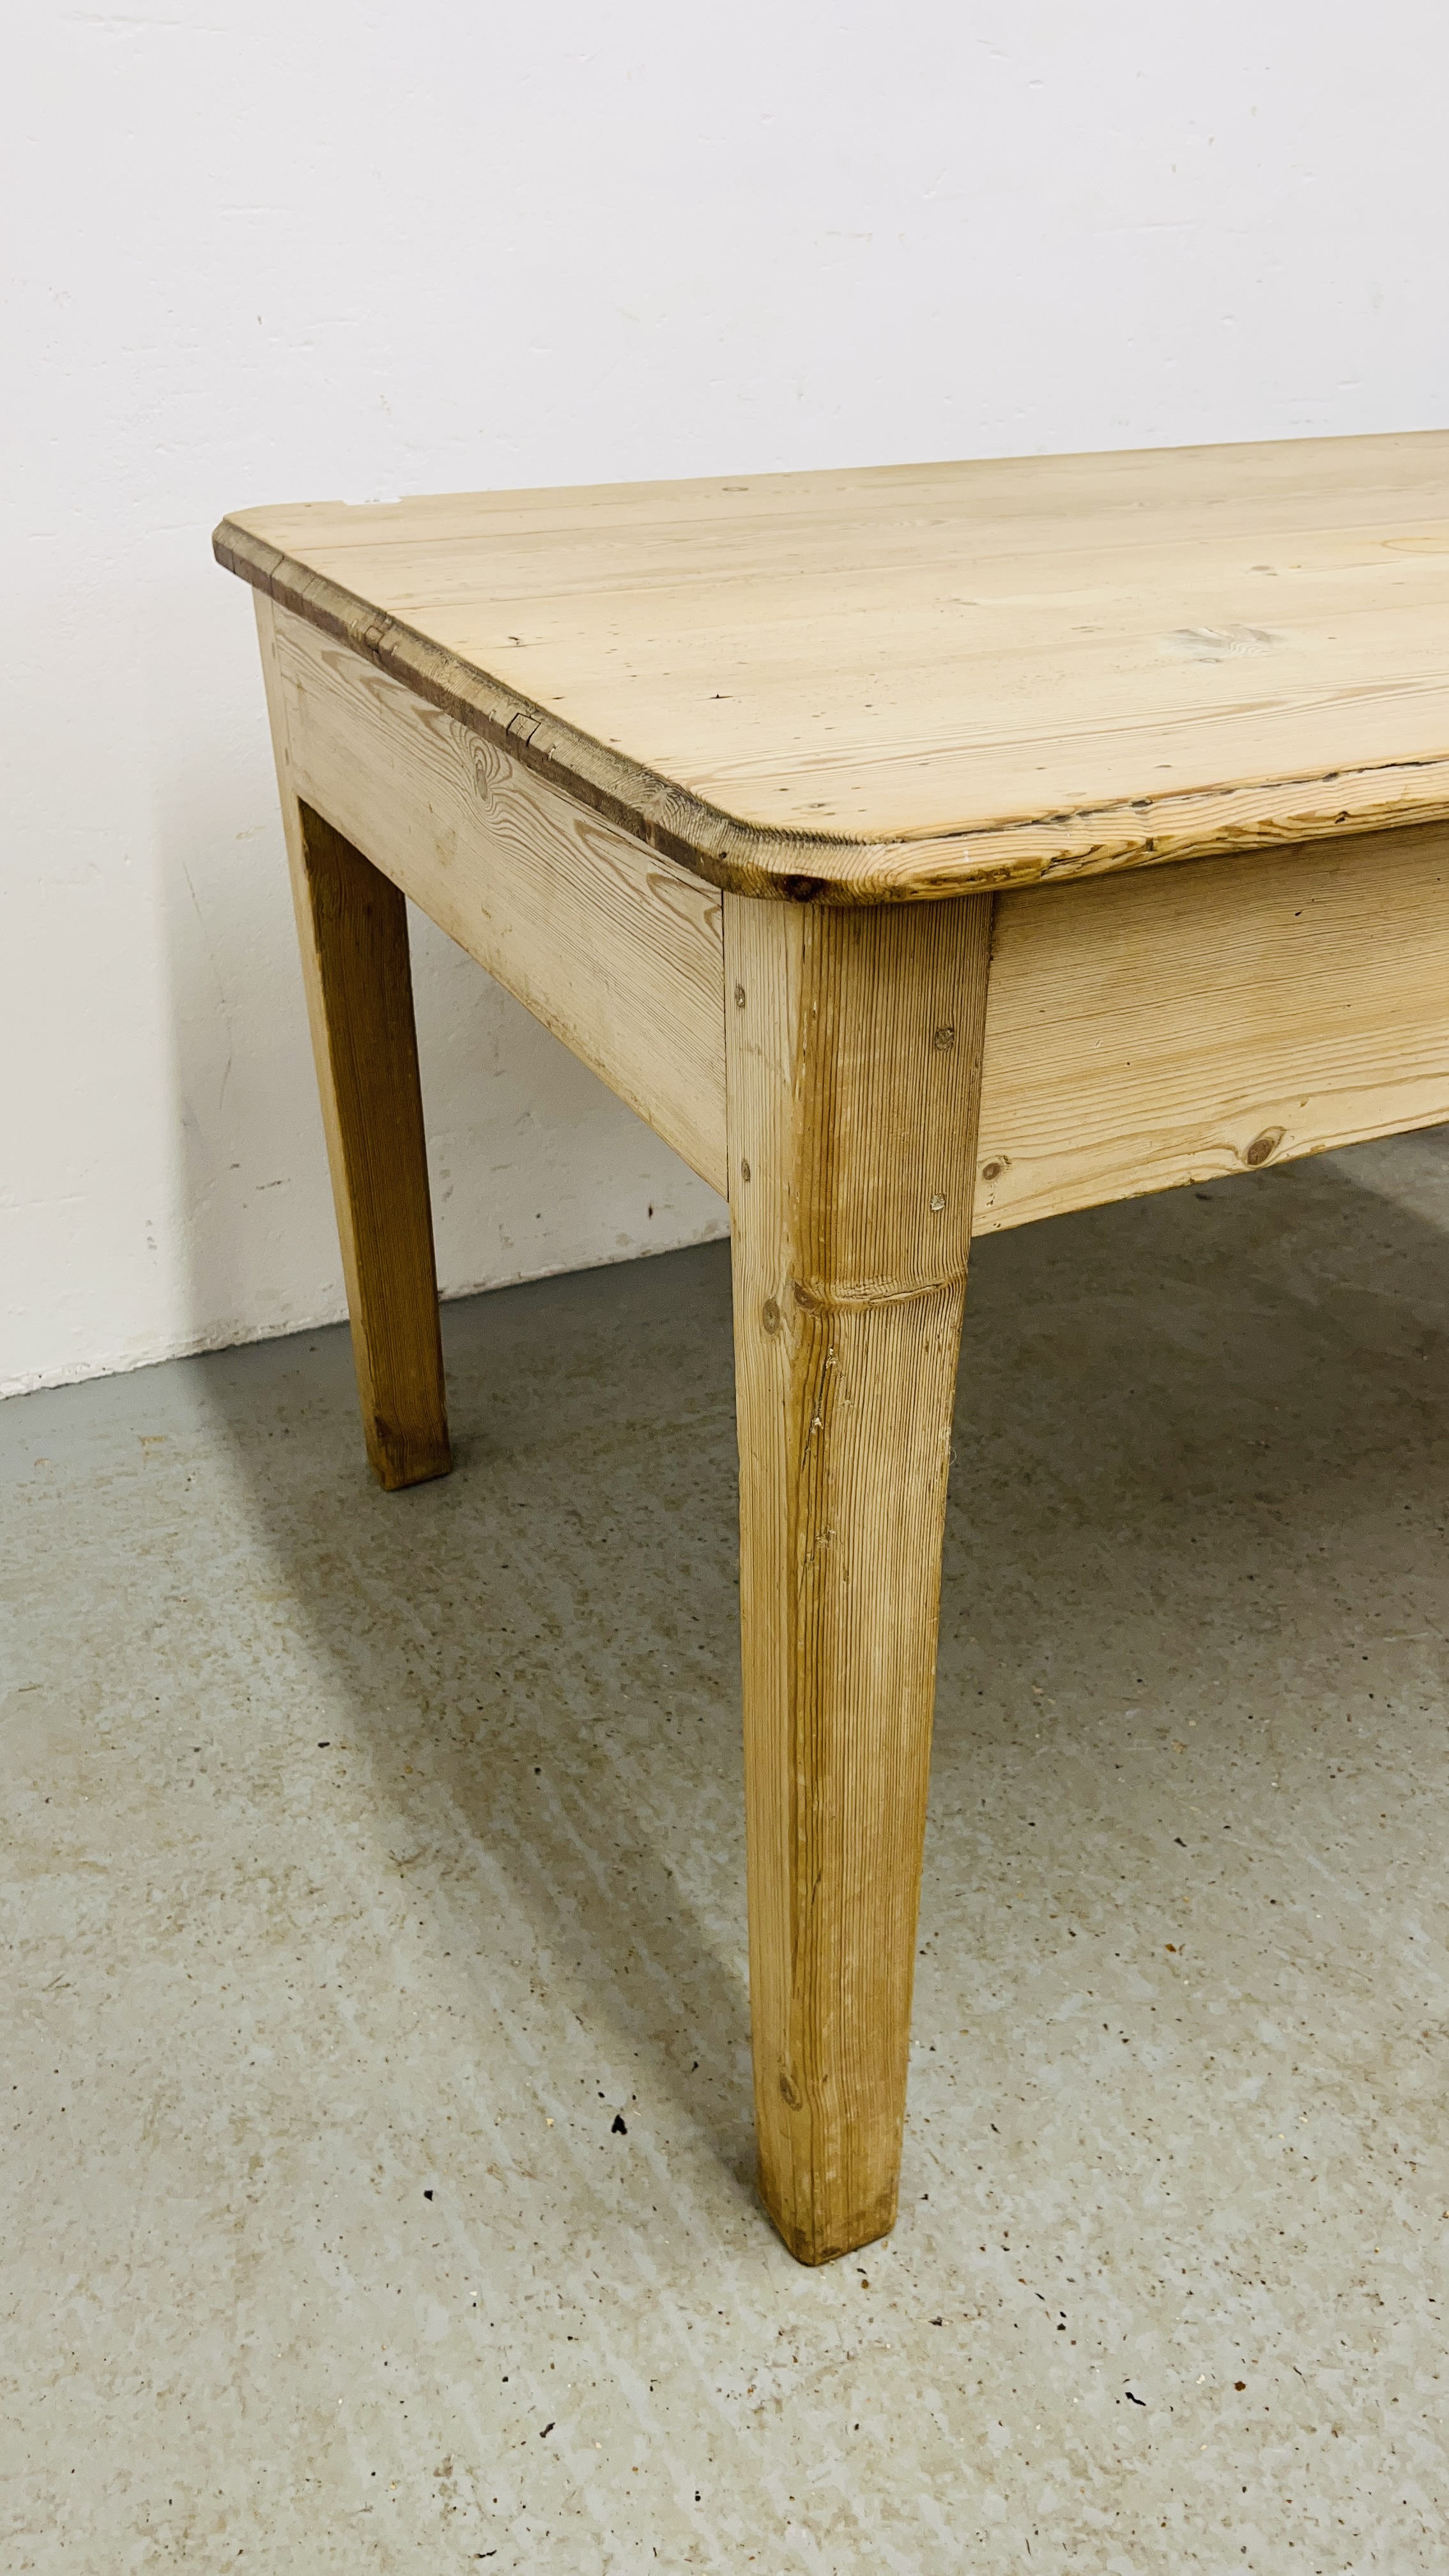 ANTIQUE WAXED PINE FARMHOUSE KITCHEN TABLE WIDTH 152CM. DEPTH 90CM. HEIGHT 77CM. - Image 6 of 11